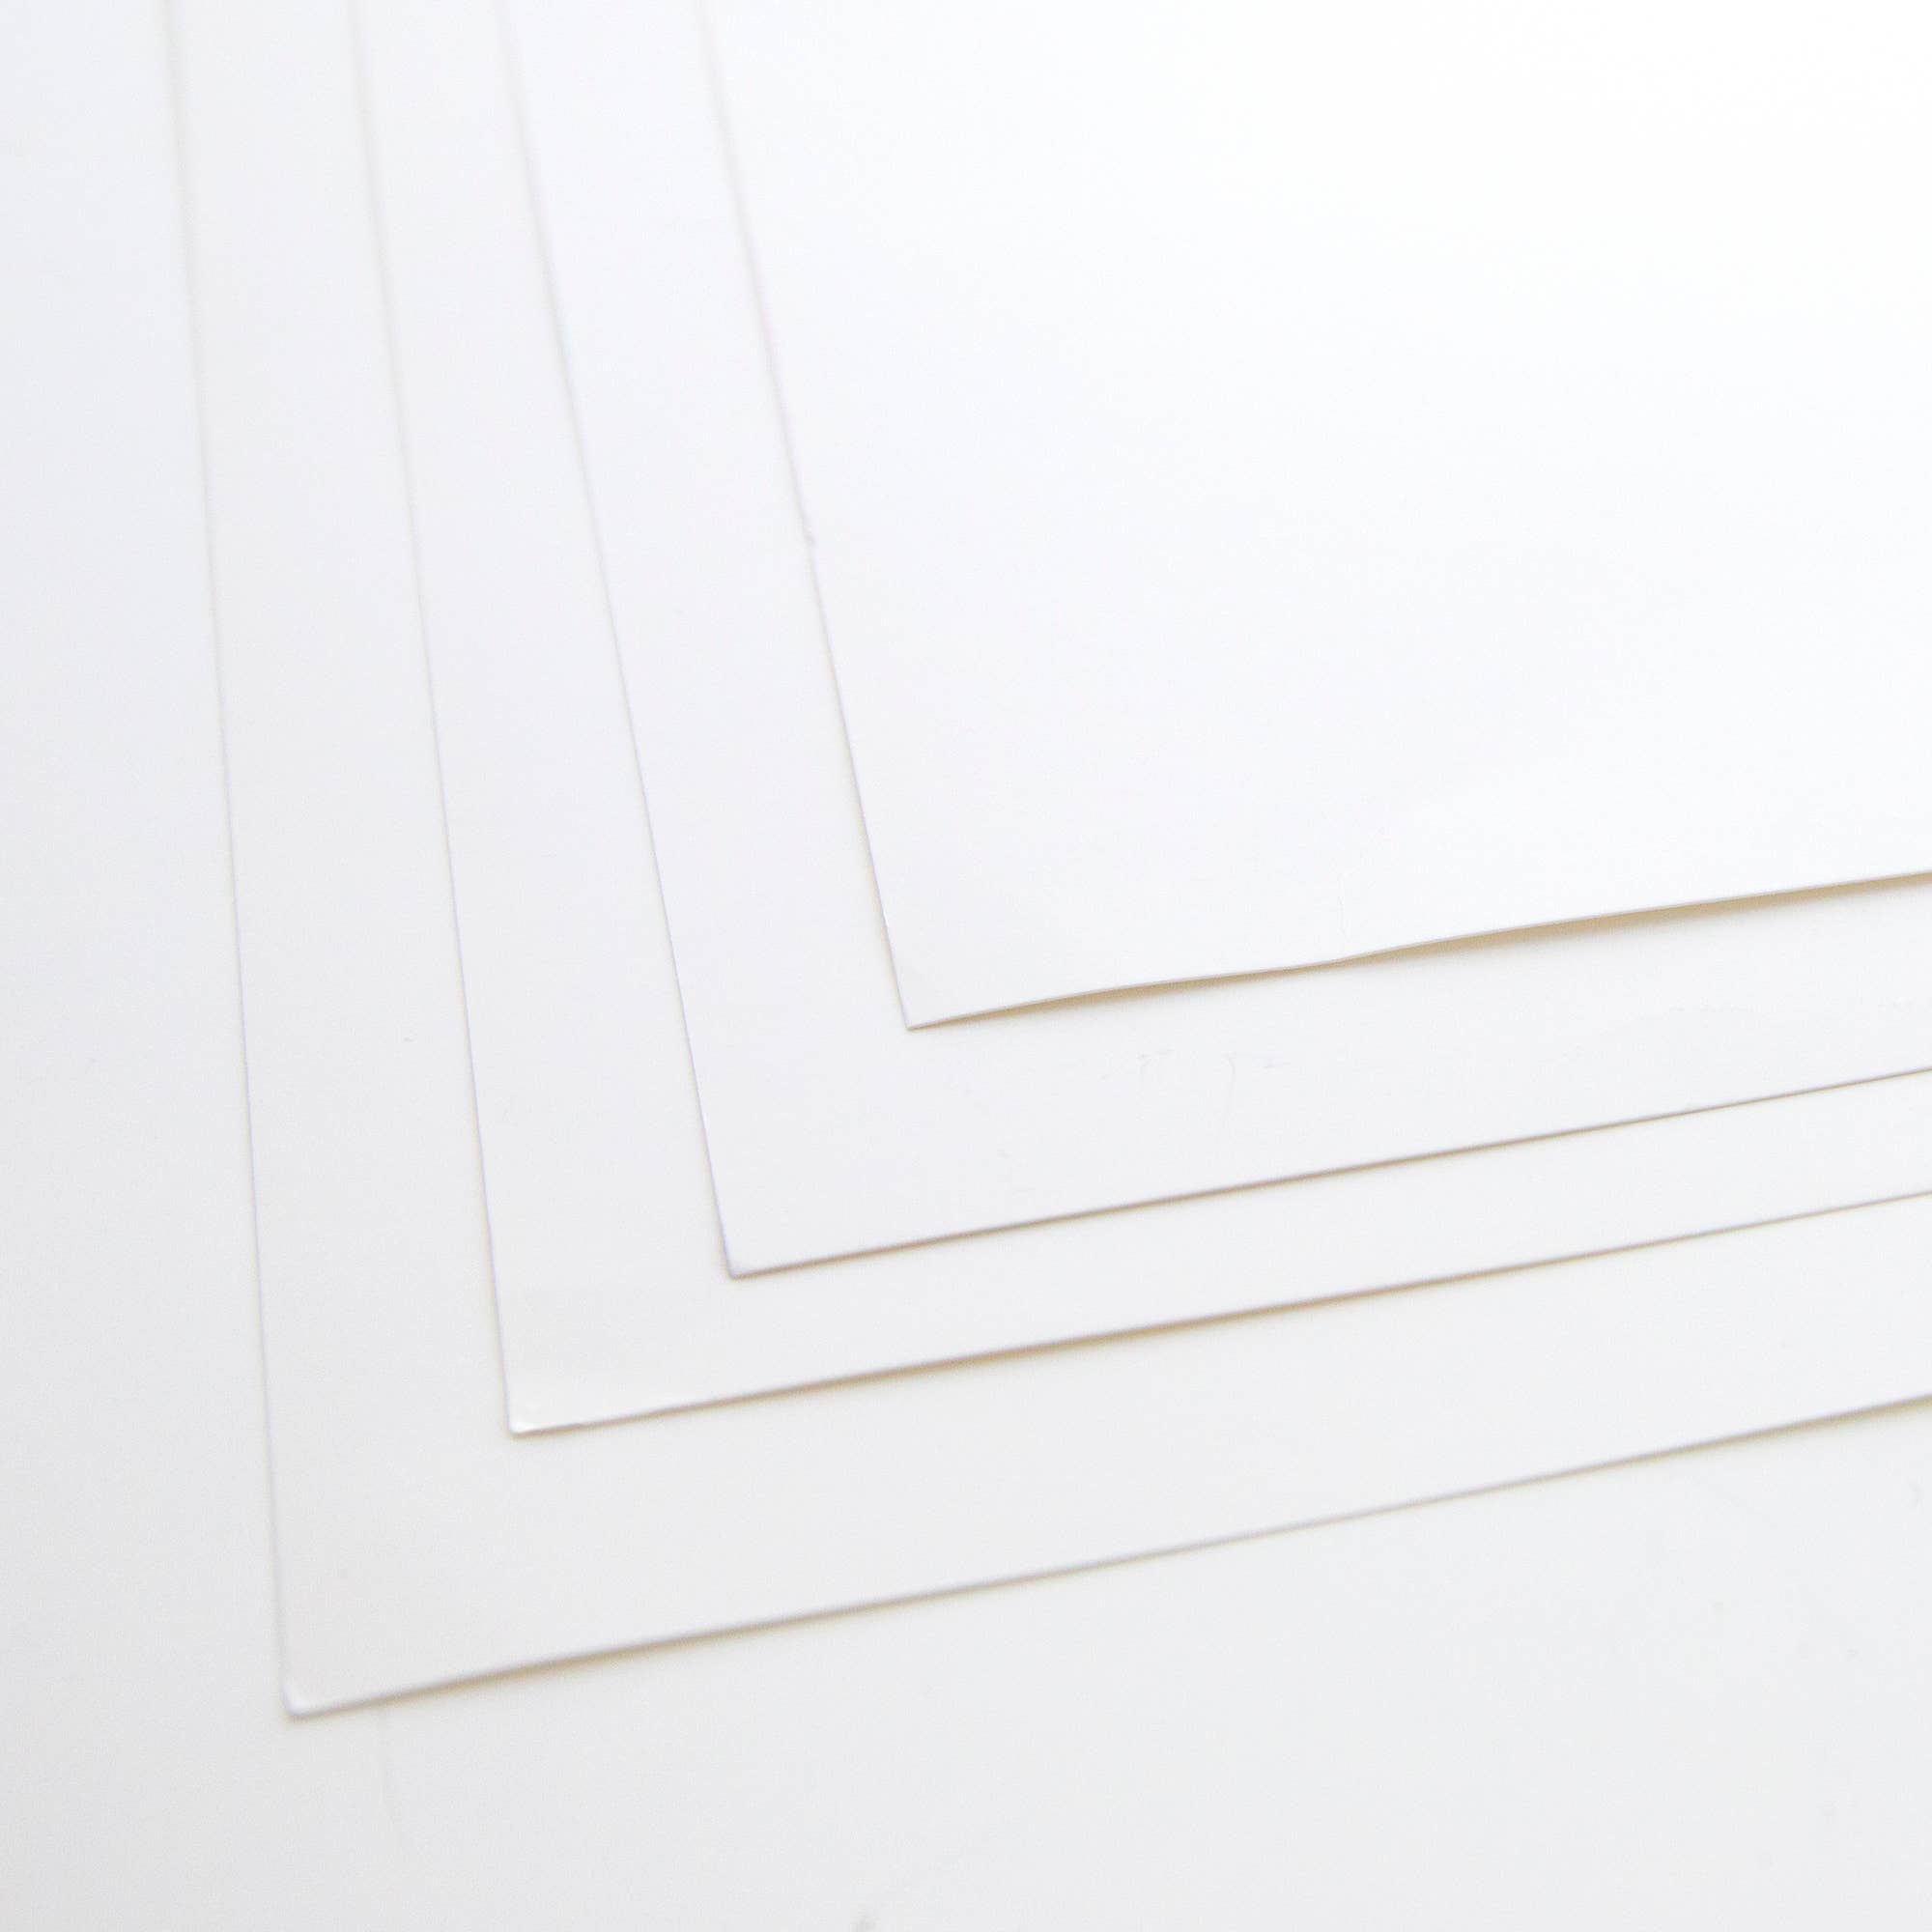 Wholesale 11 X 14 White Poster Board (5/Pack) for your store - Faire